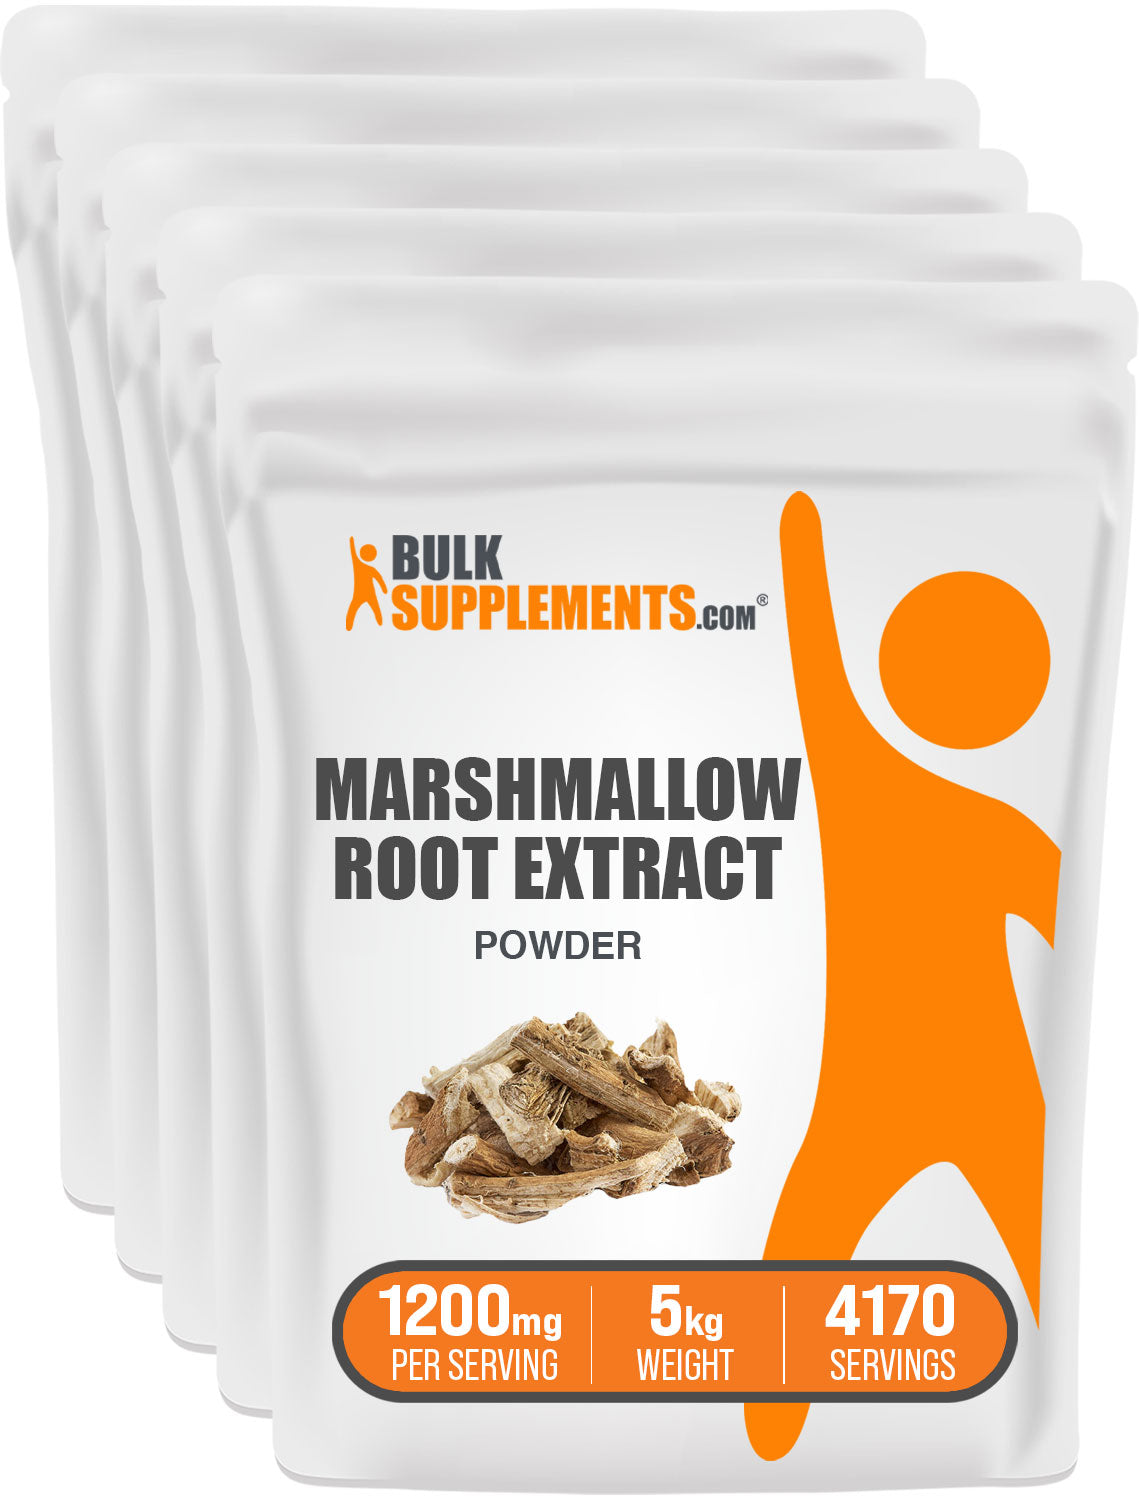 BulkSupplements Marshmallow Root Extract Powder 5kg bags